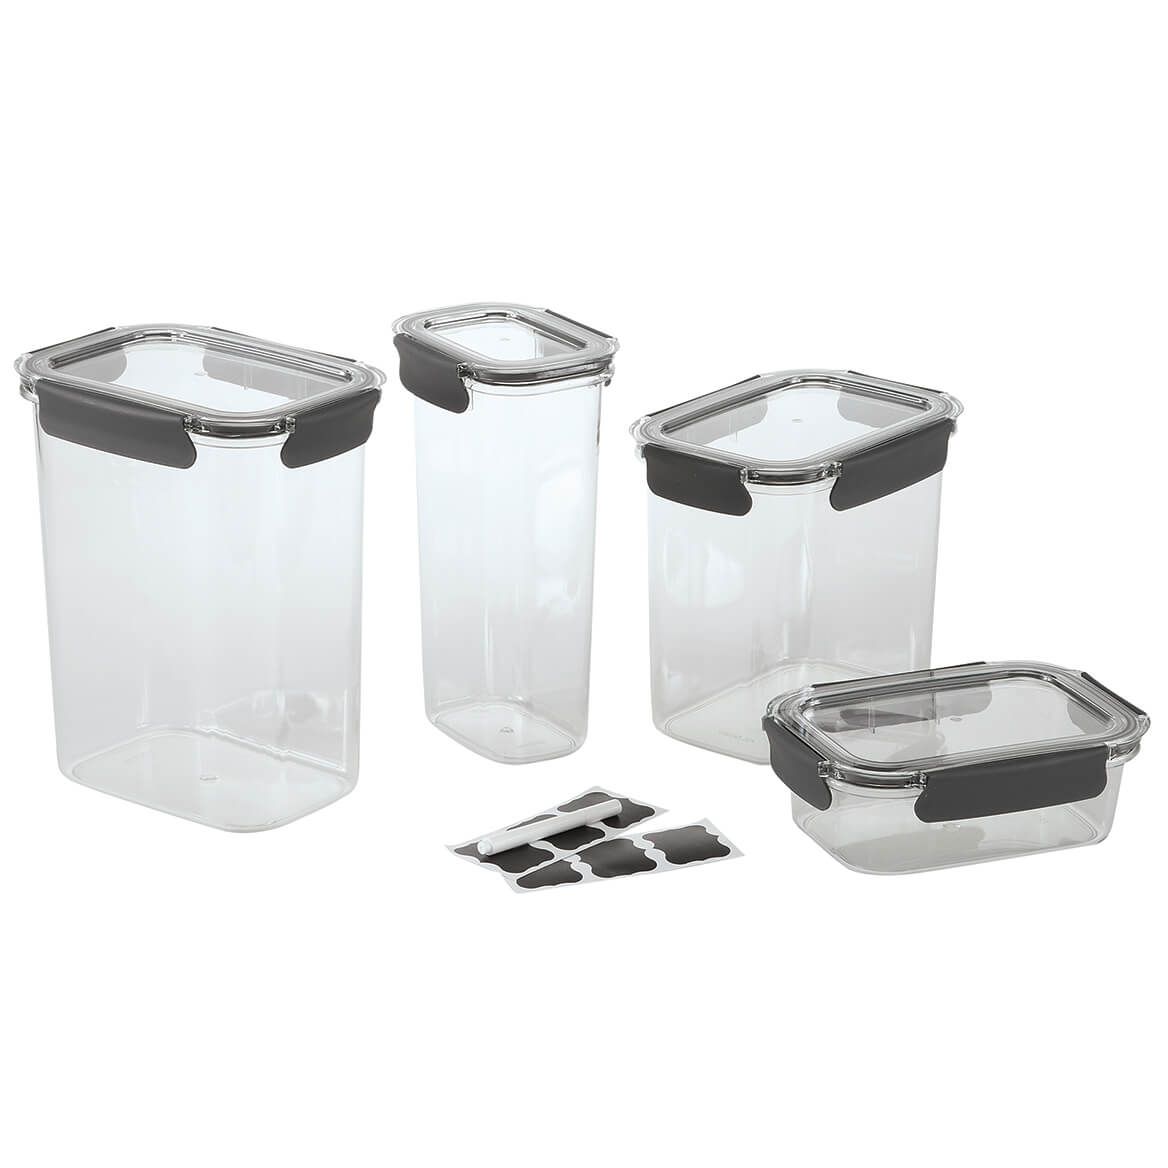 Chef's Own Airtight Containers, Set of 4 + '-' + 376600